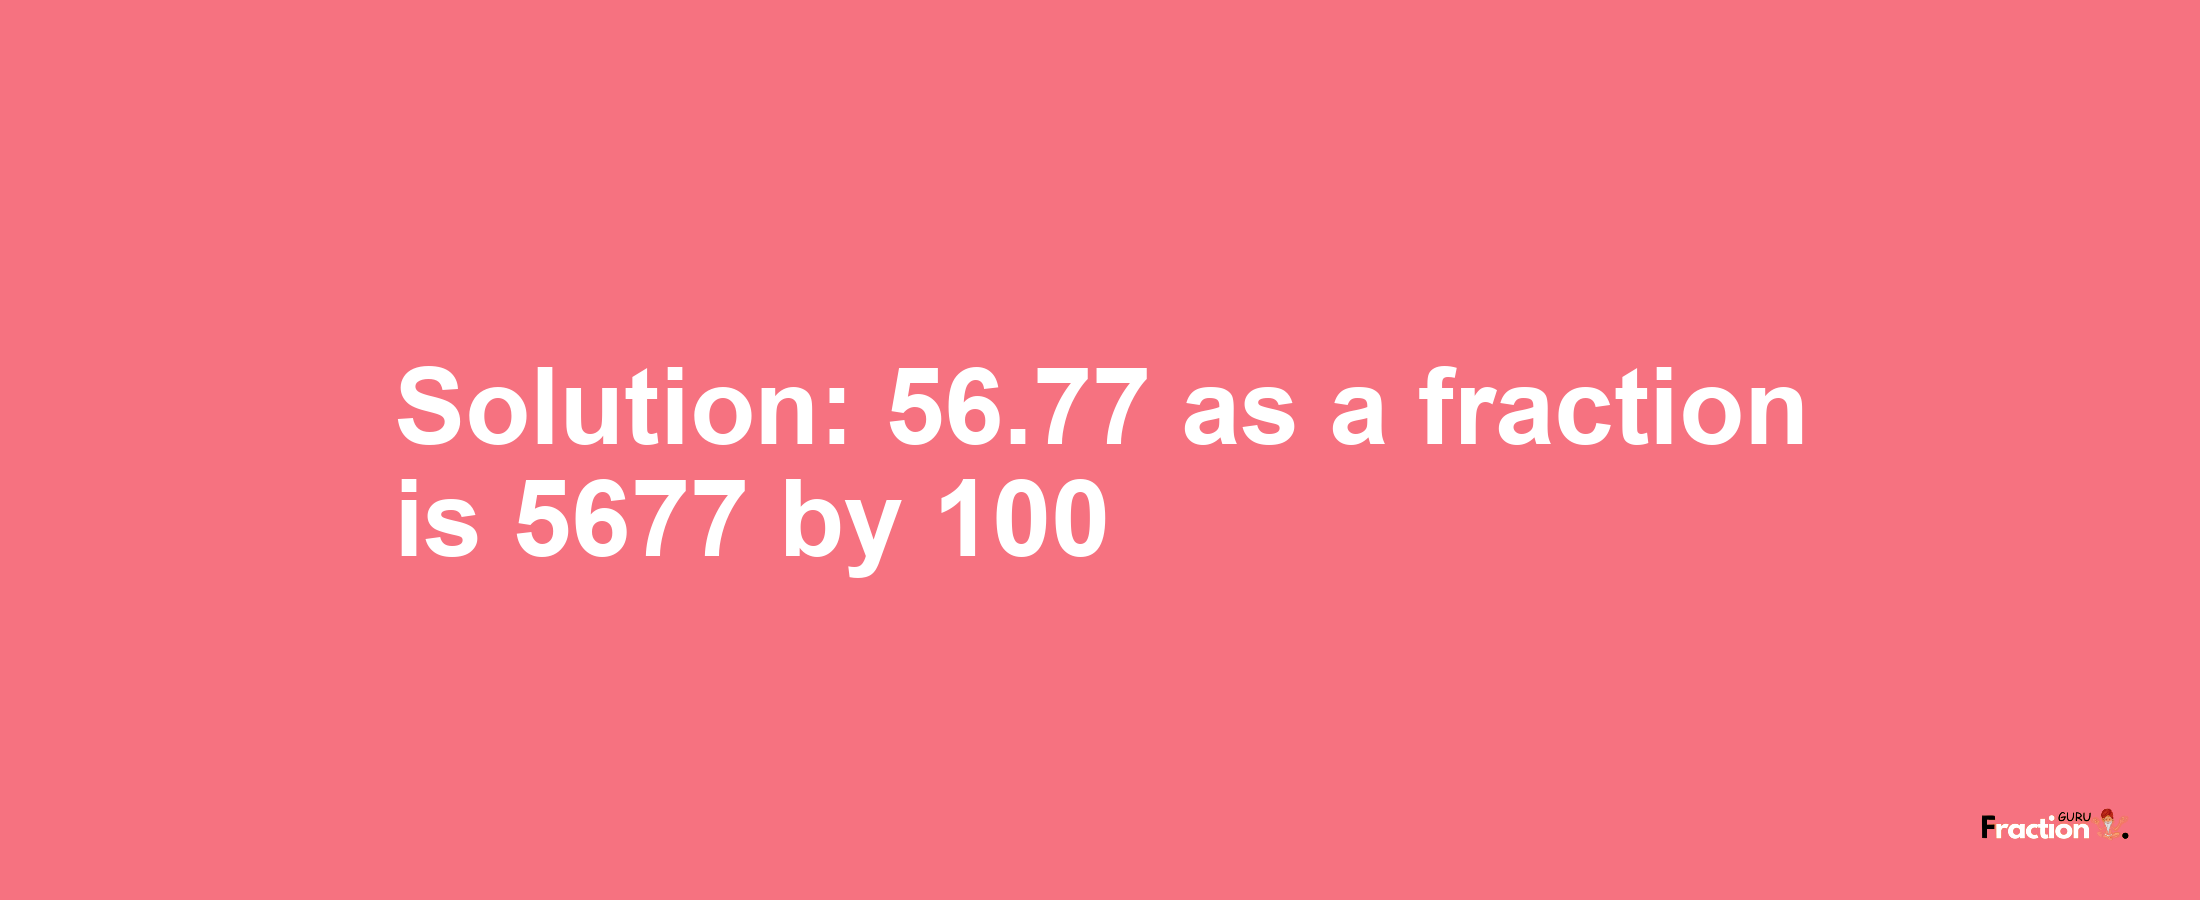 Solution:56.77 as a fraction is 5677/100